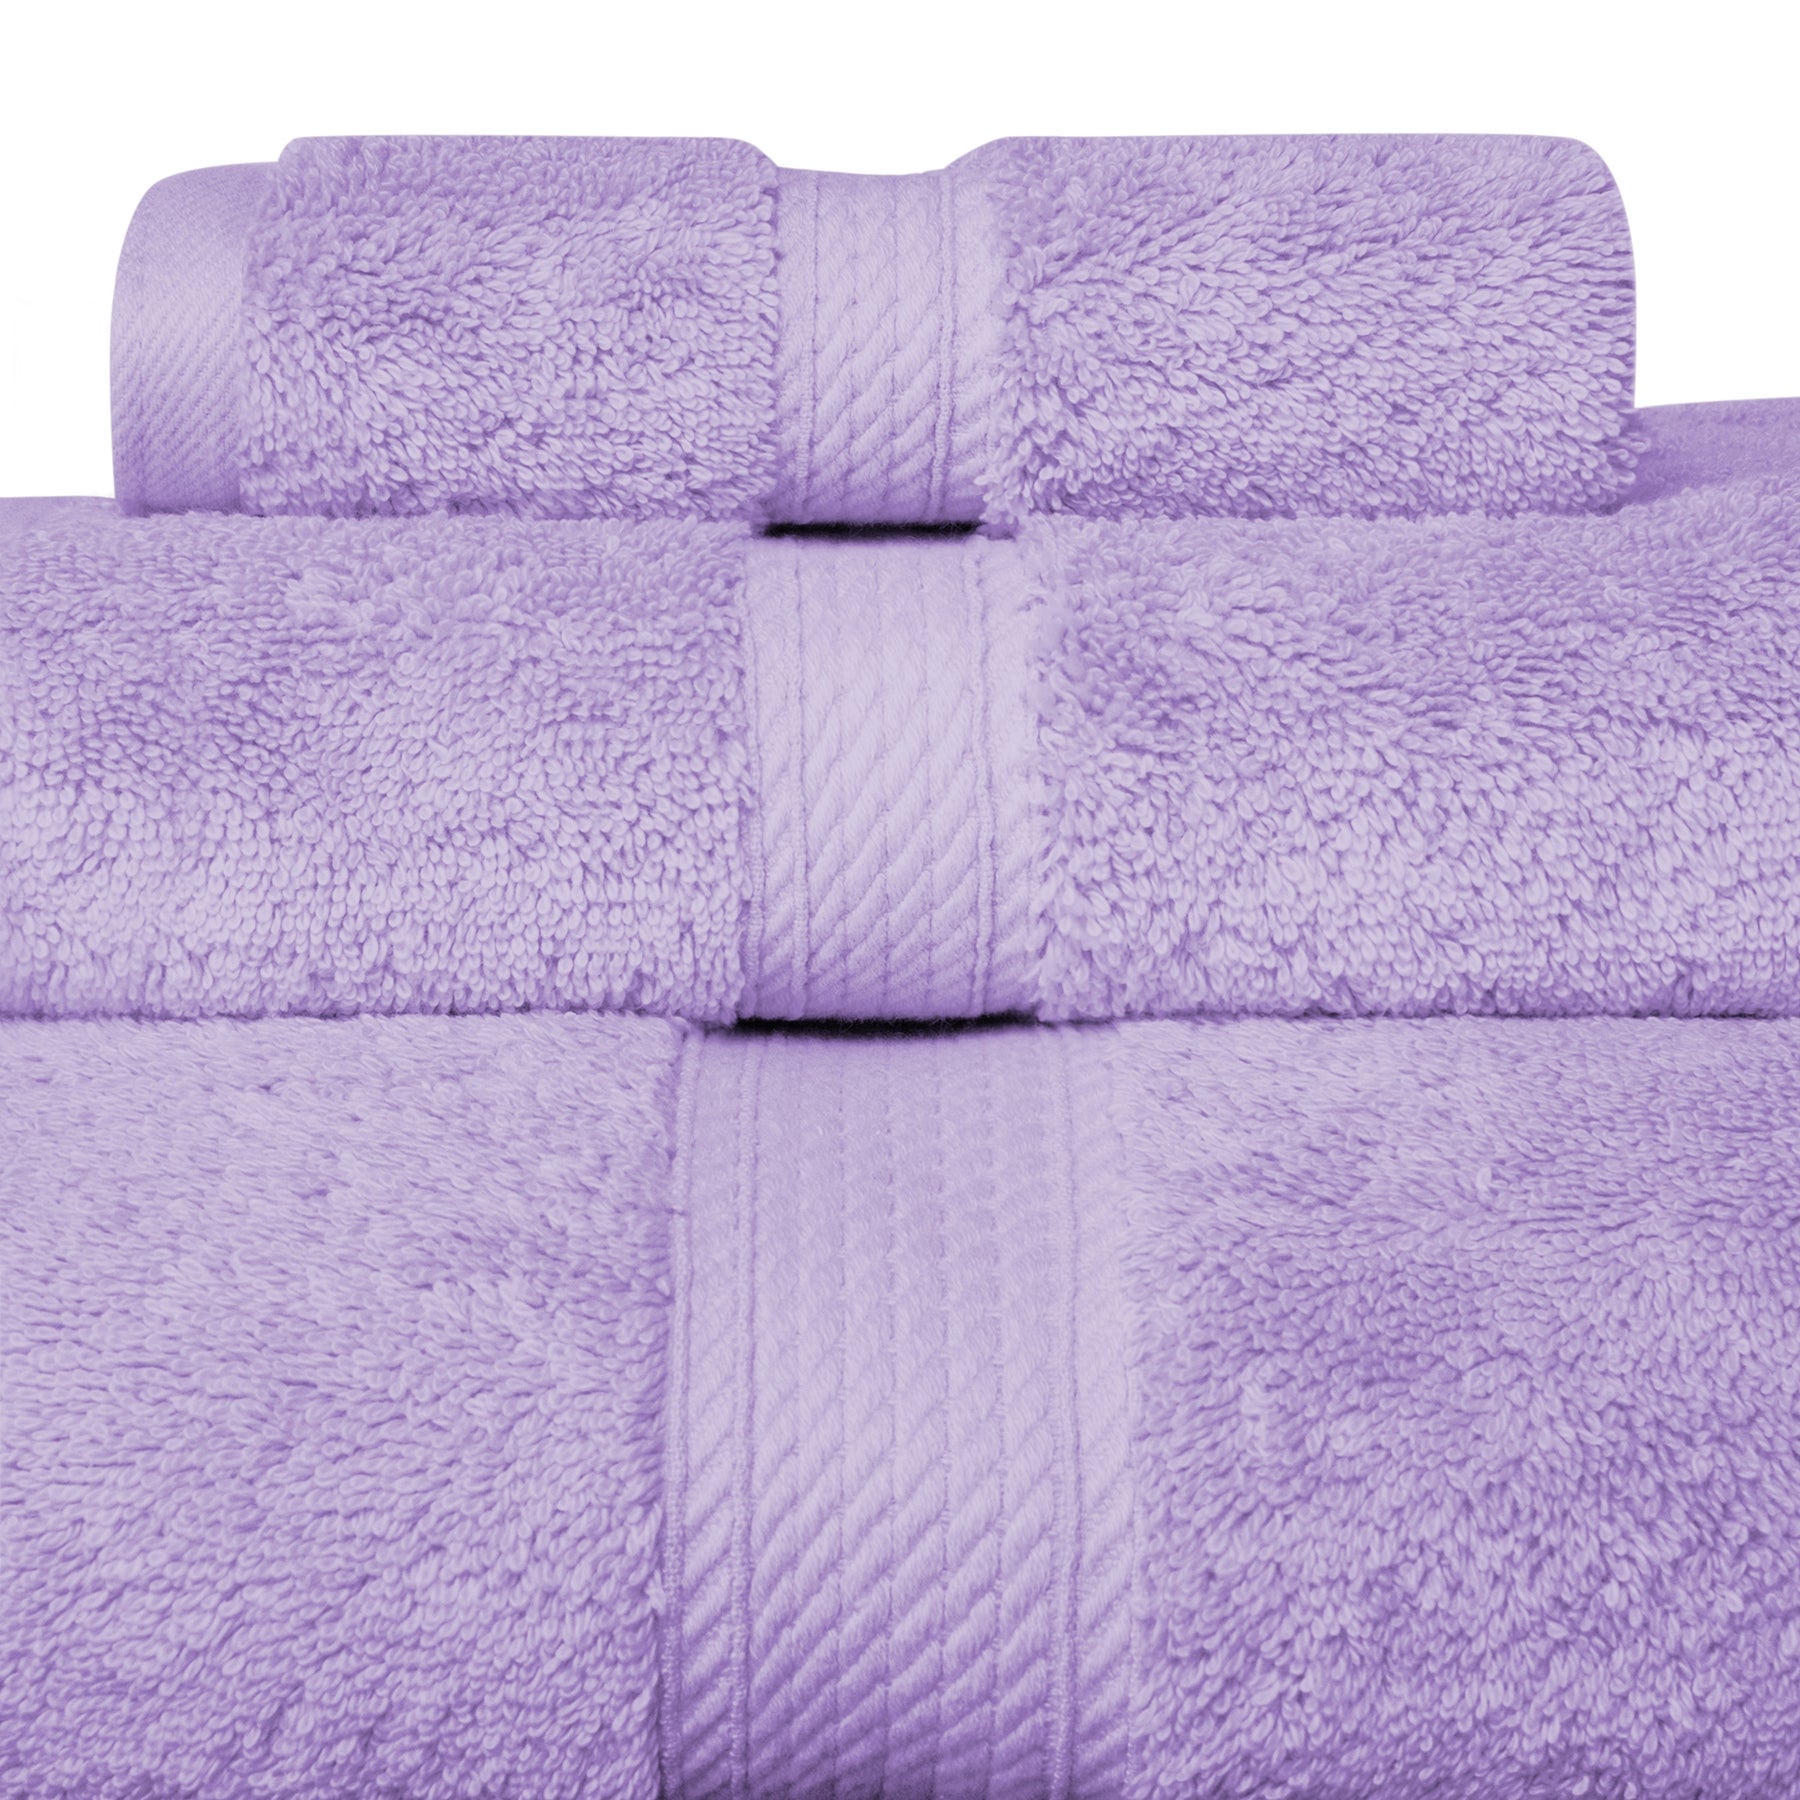 3 Pack Cotton Bath Towels 13x30 inch Super Absorbent for Pool Spa Utopia Towels, Purple